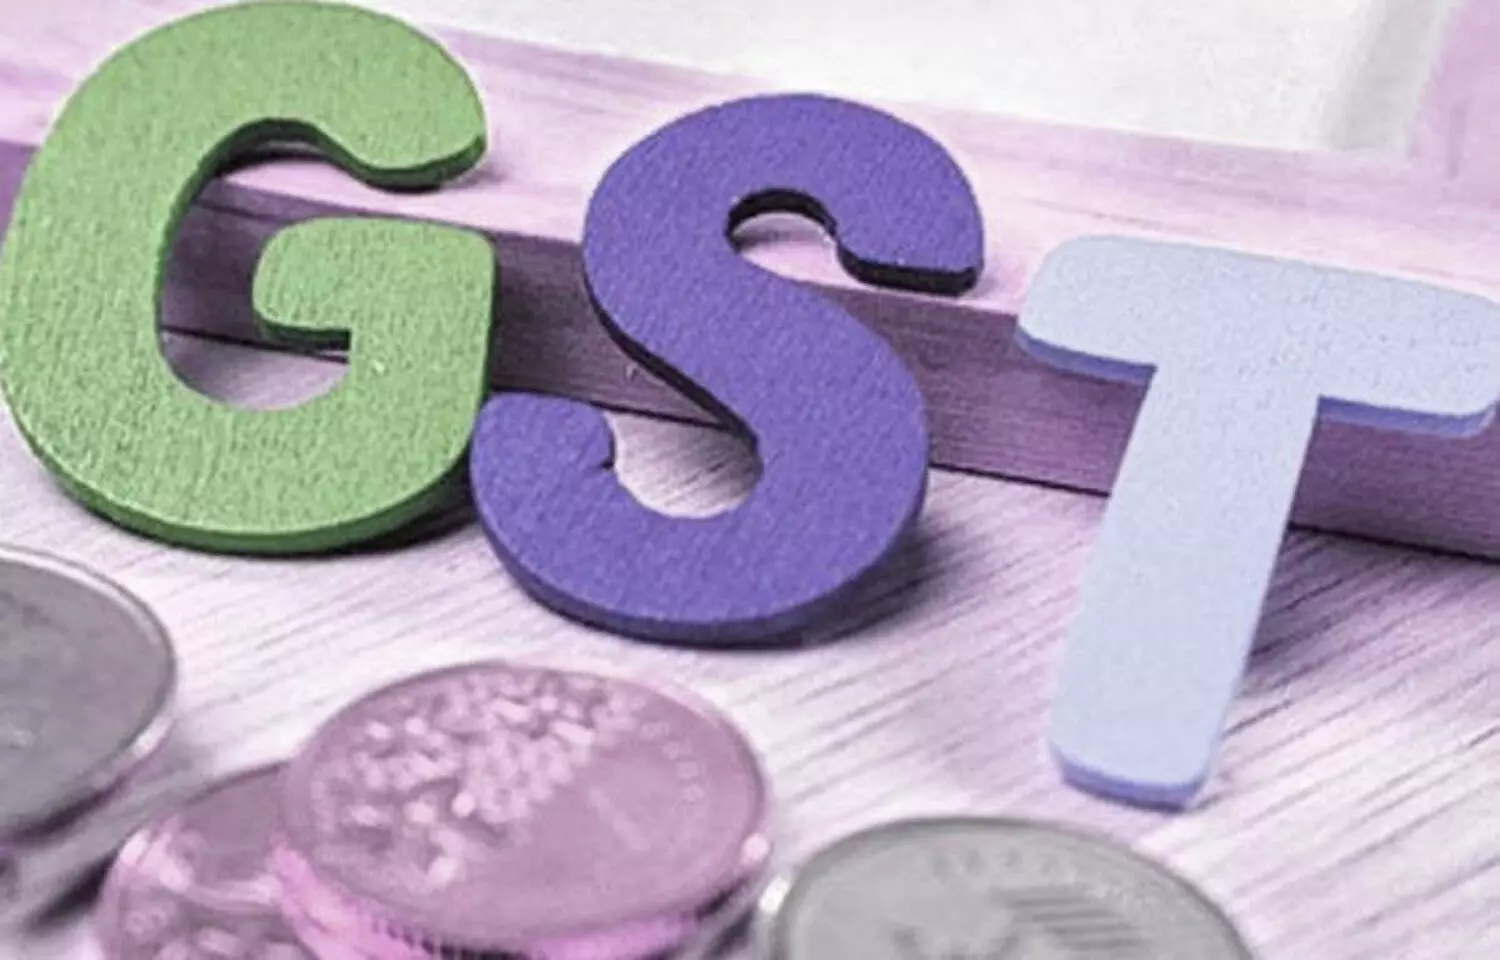 GST for COVID drugs pegged at 5 percent, says Govt